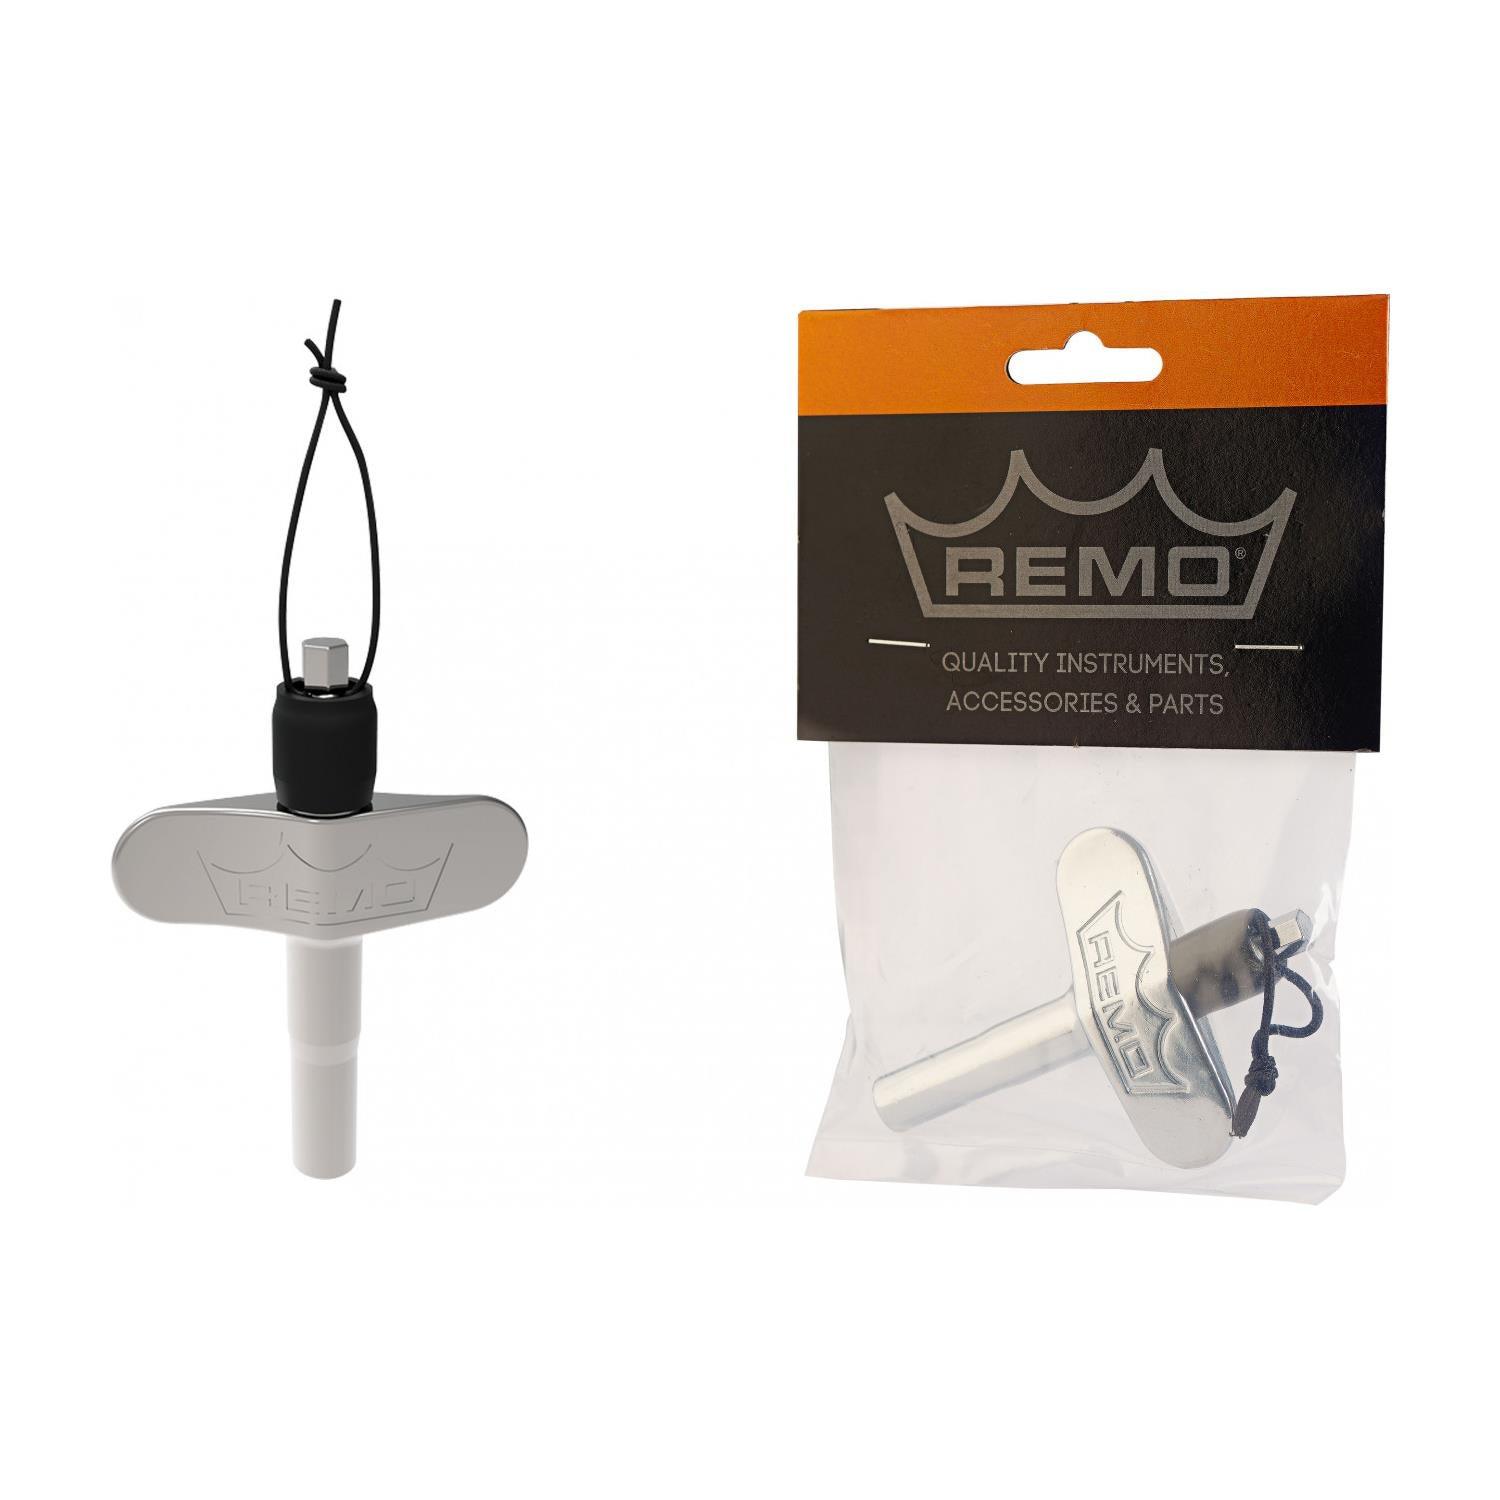 Remo HK-2460-00 Quicktech Drum Key Magnetic - DY Pro Audio